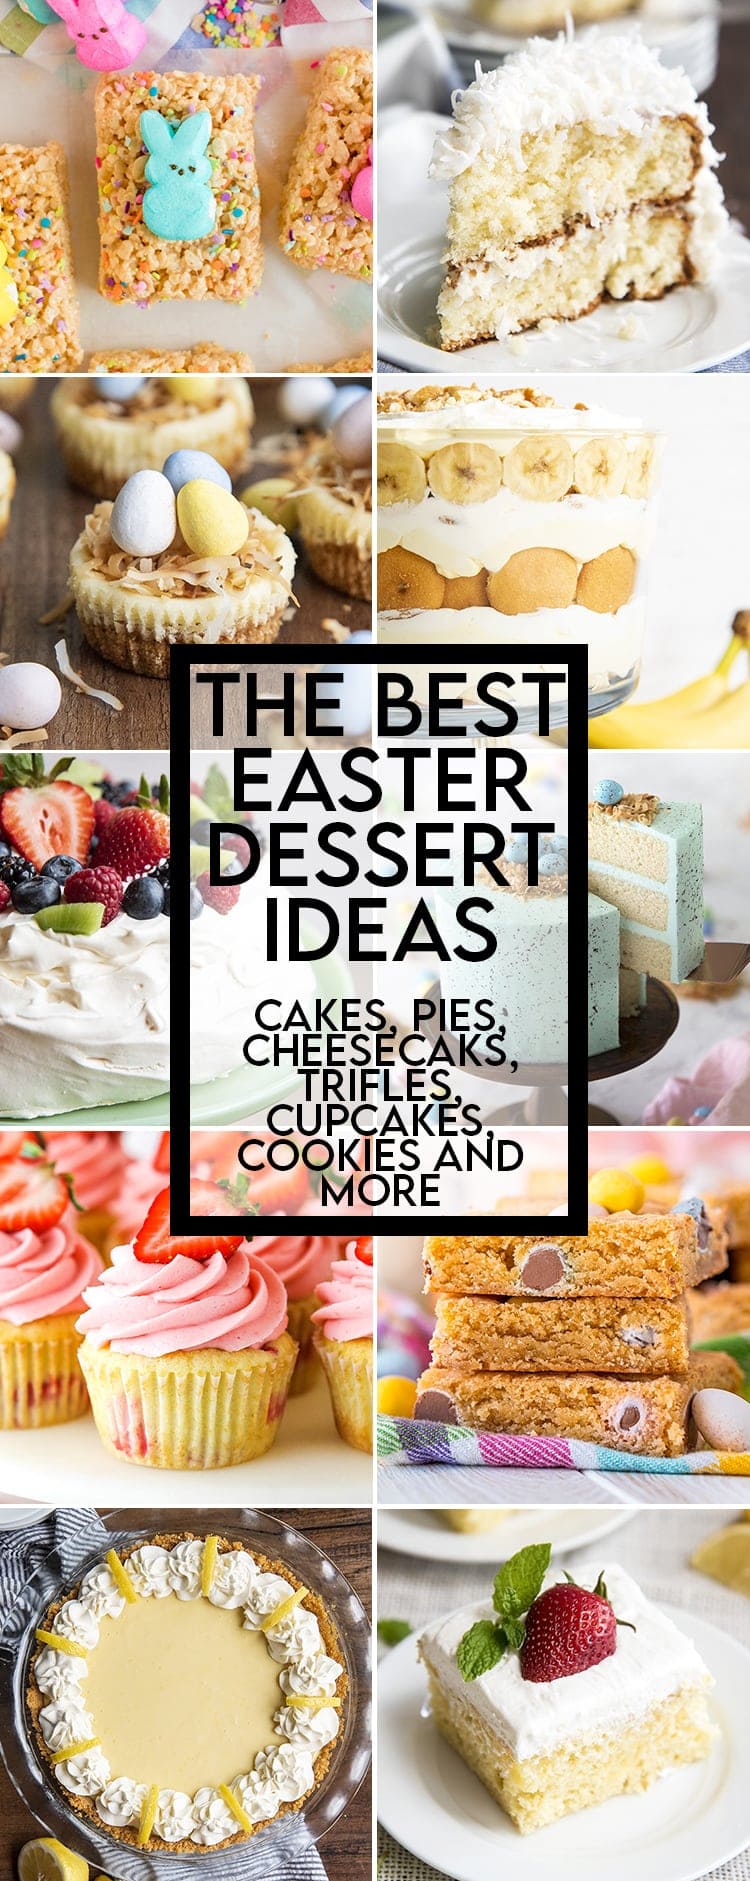 A collage of Easter desserts with a text overlay in the middle.